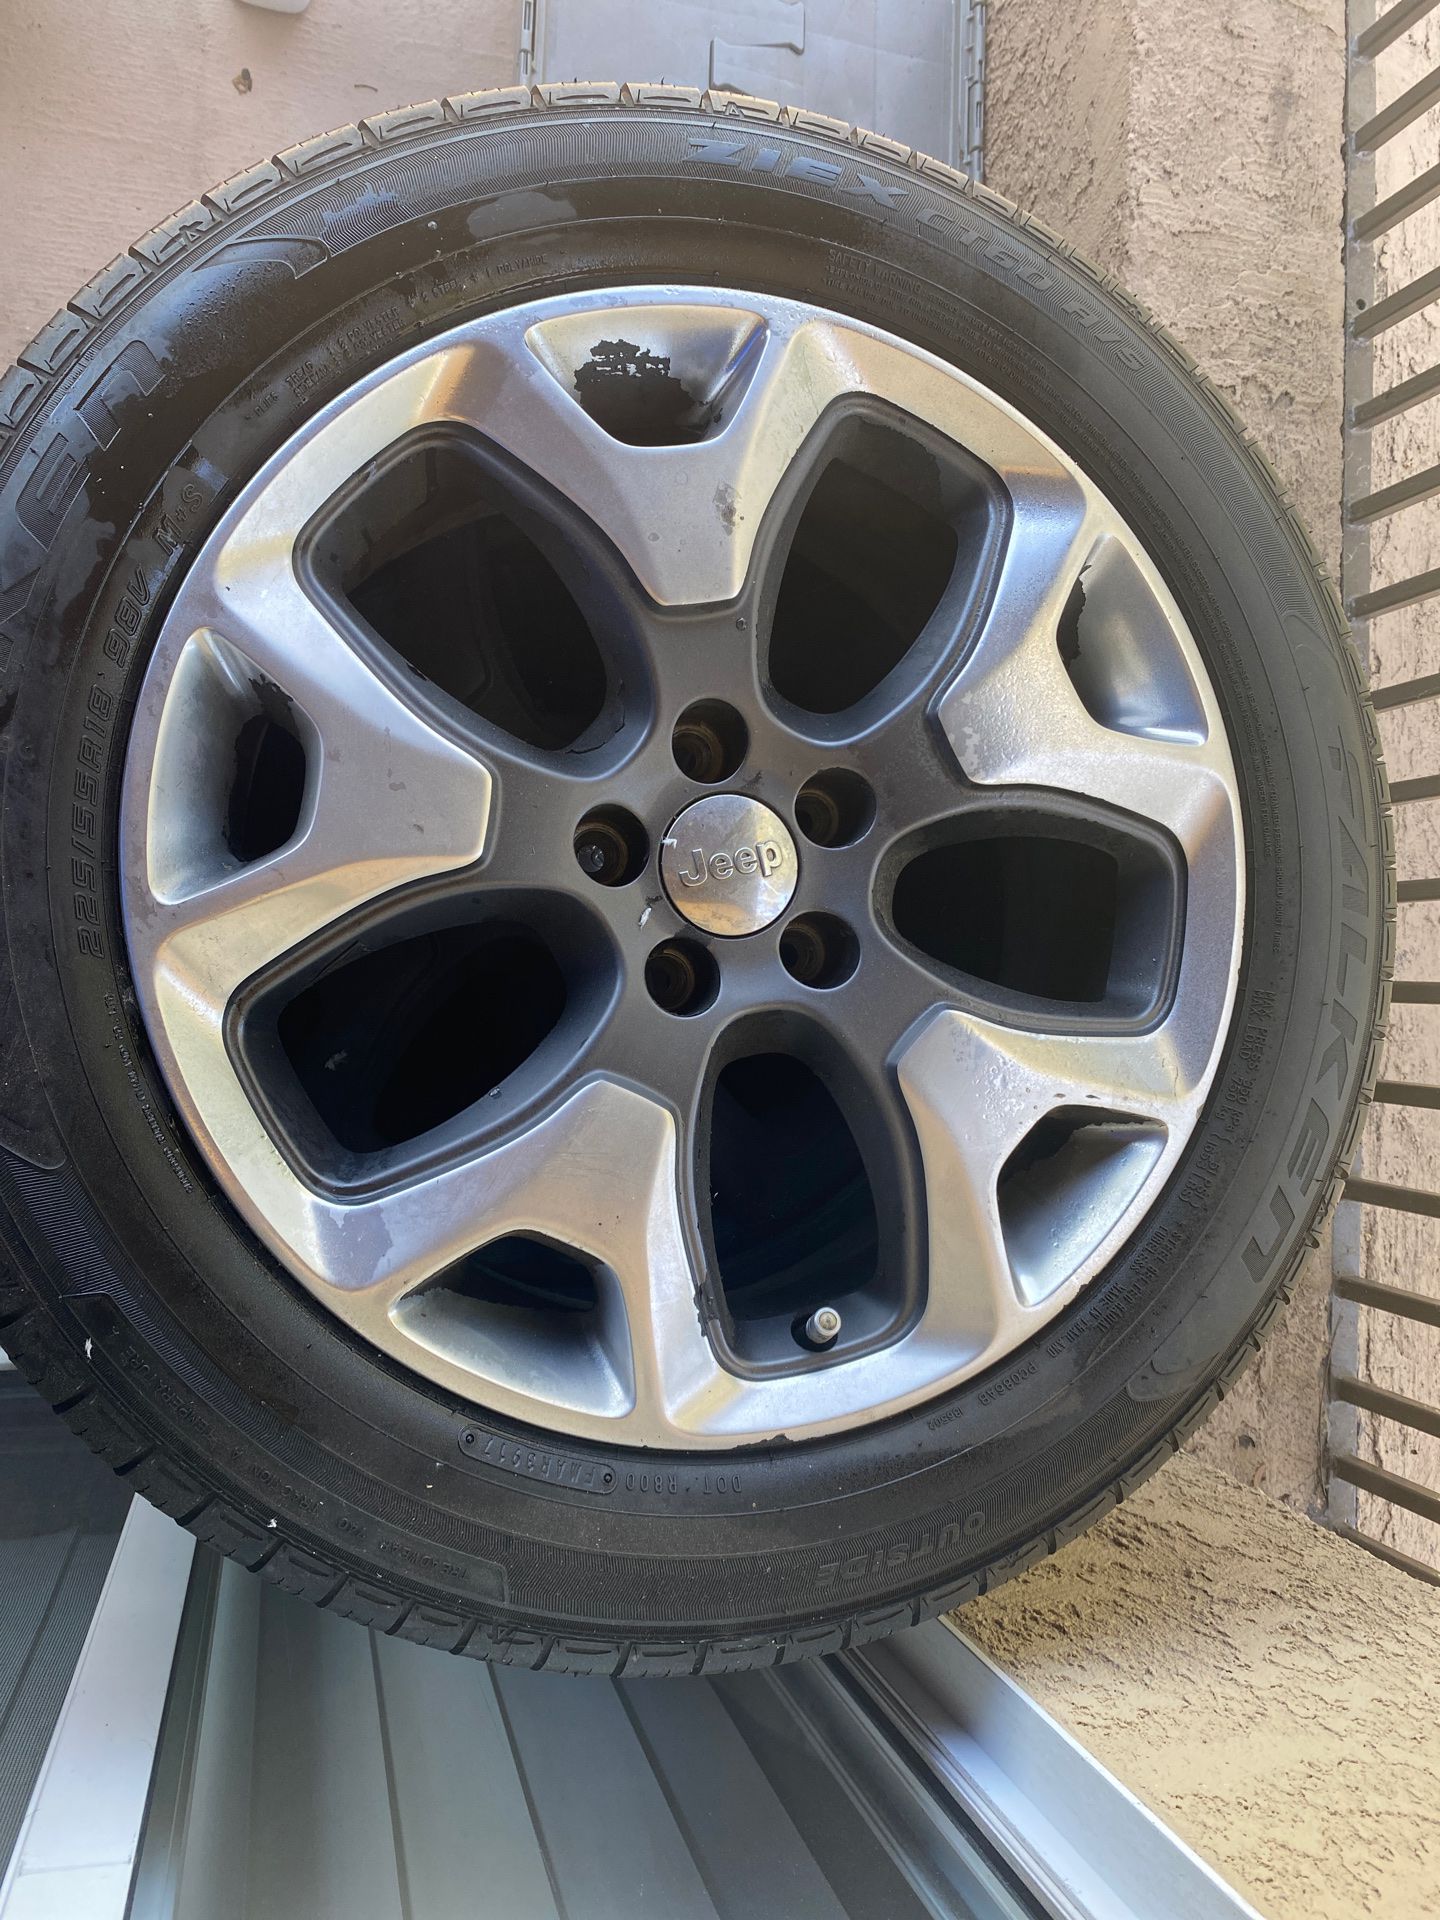 2018 Jeep compas wheels and tires set of 4